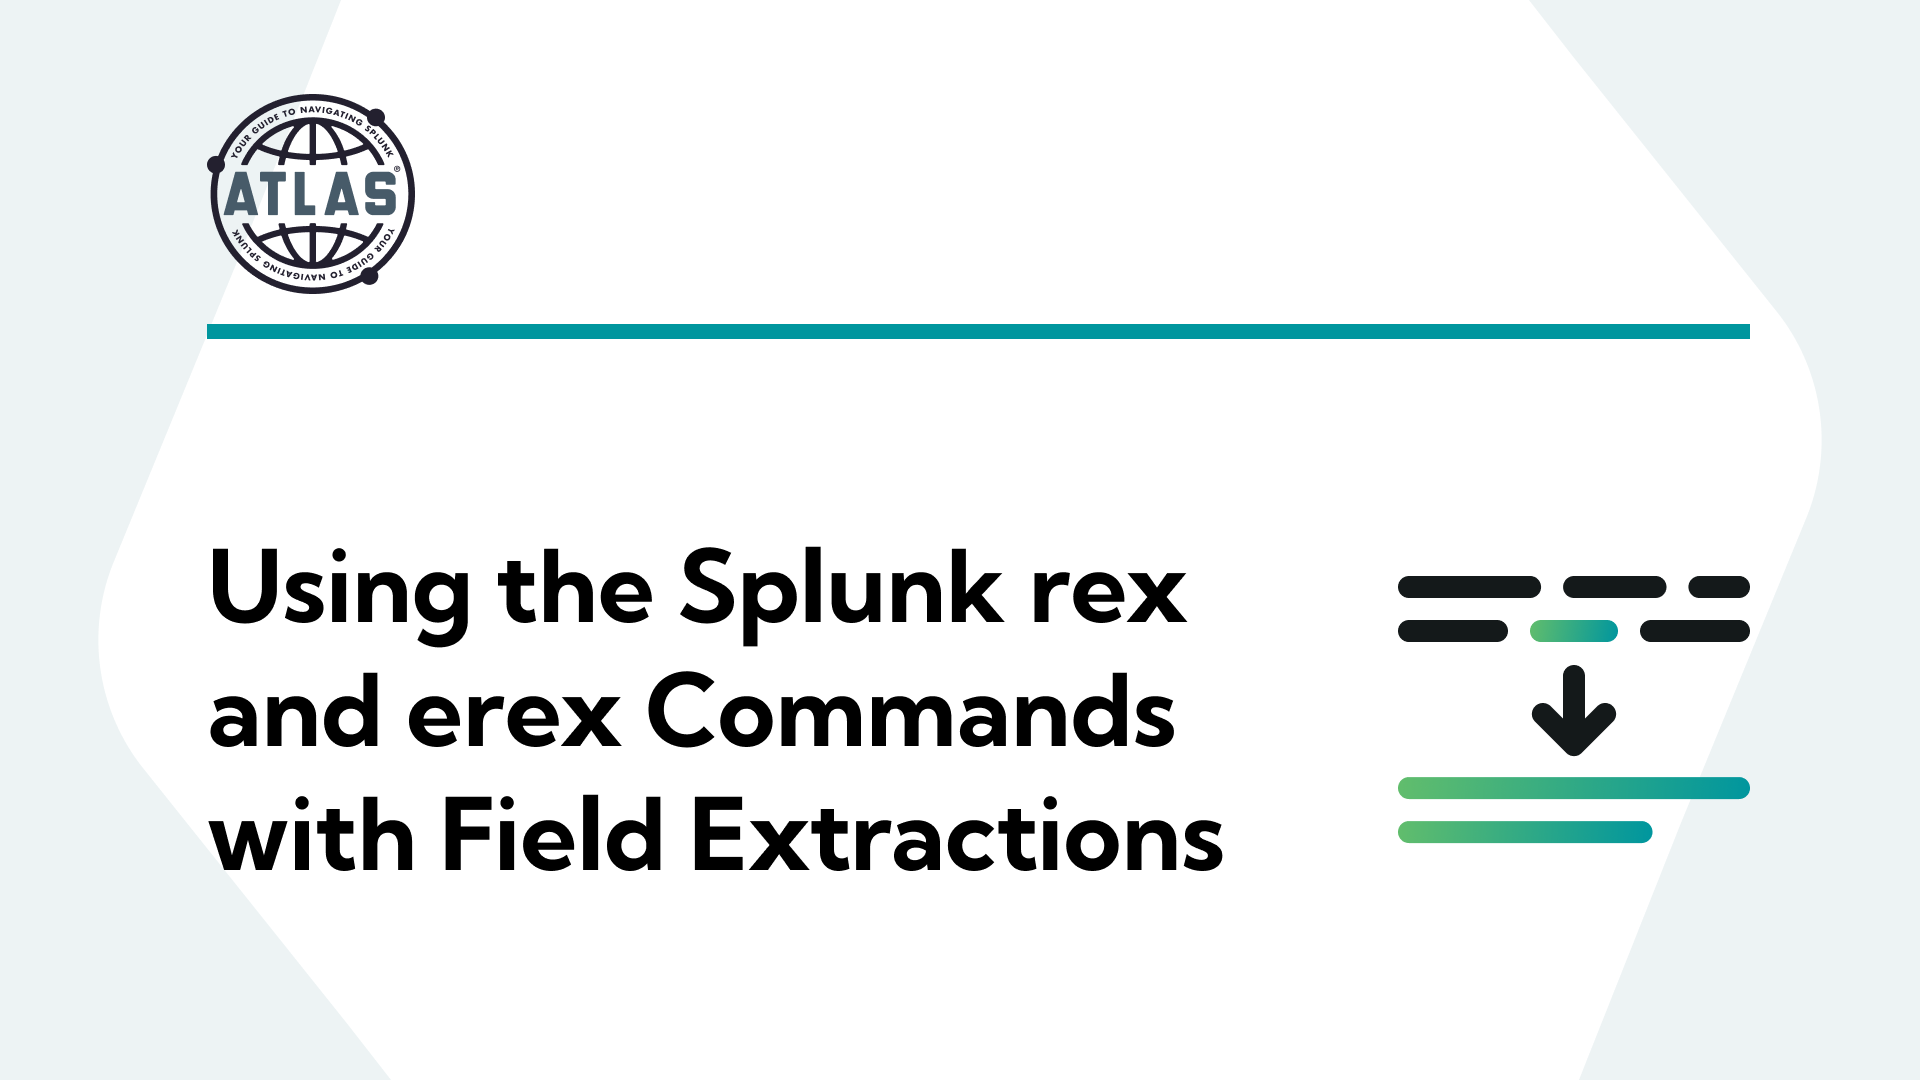 Using the Splunk rex and erex Commands with Field Extractions